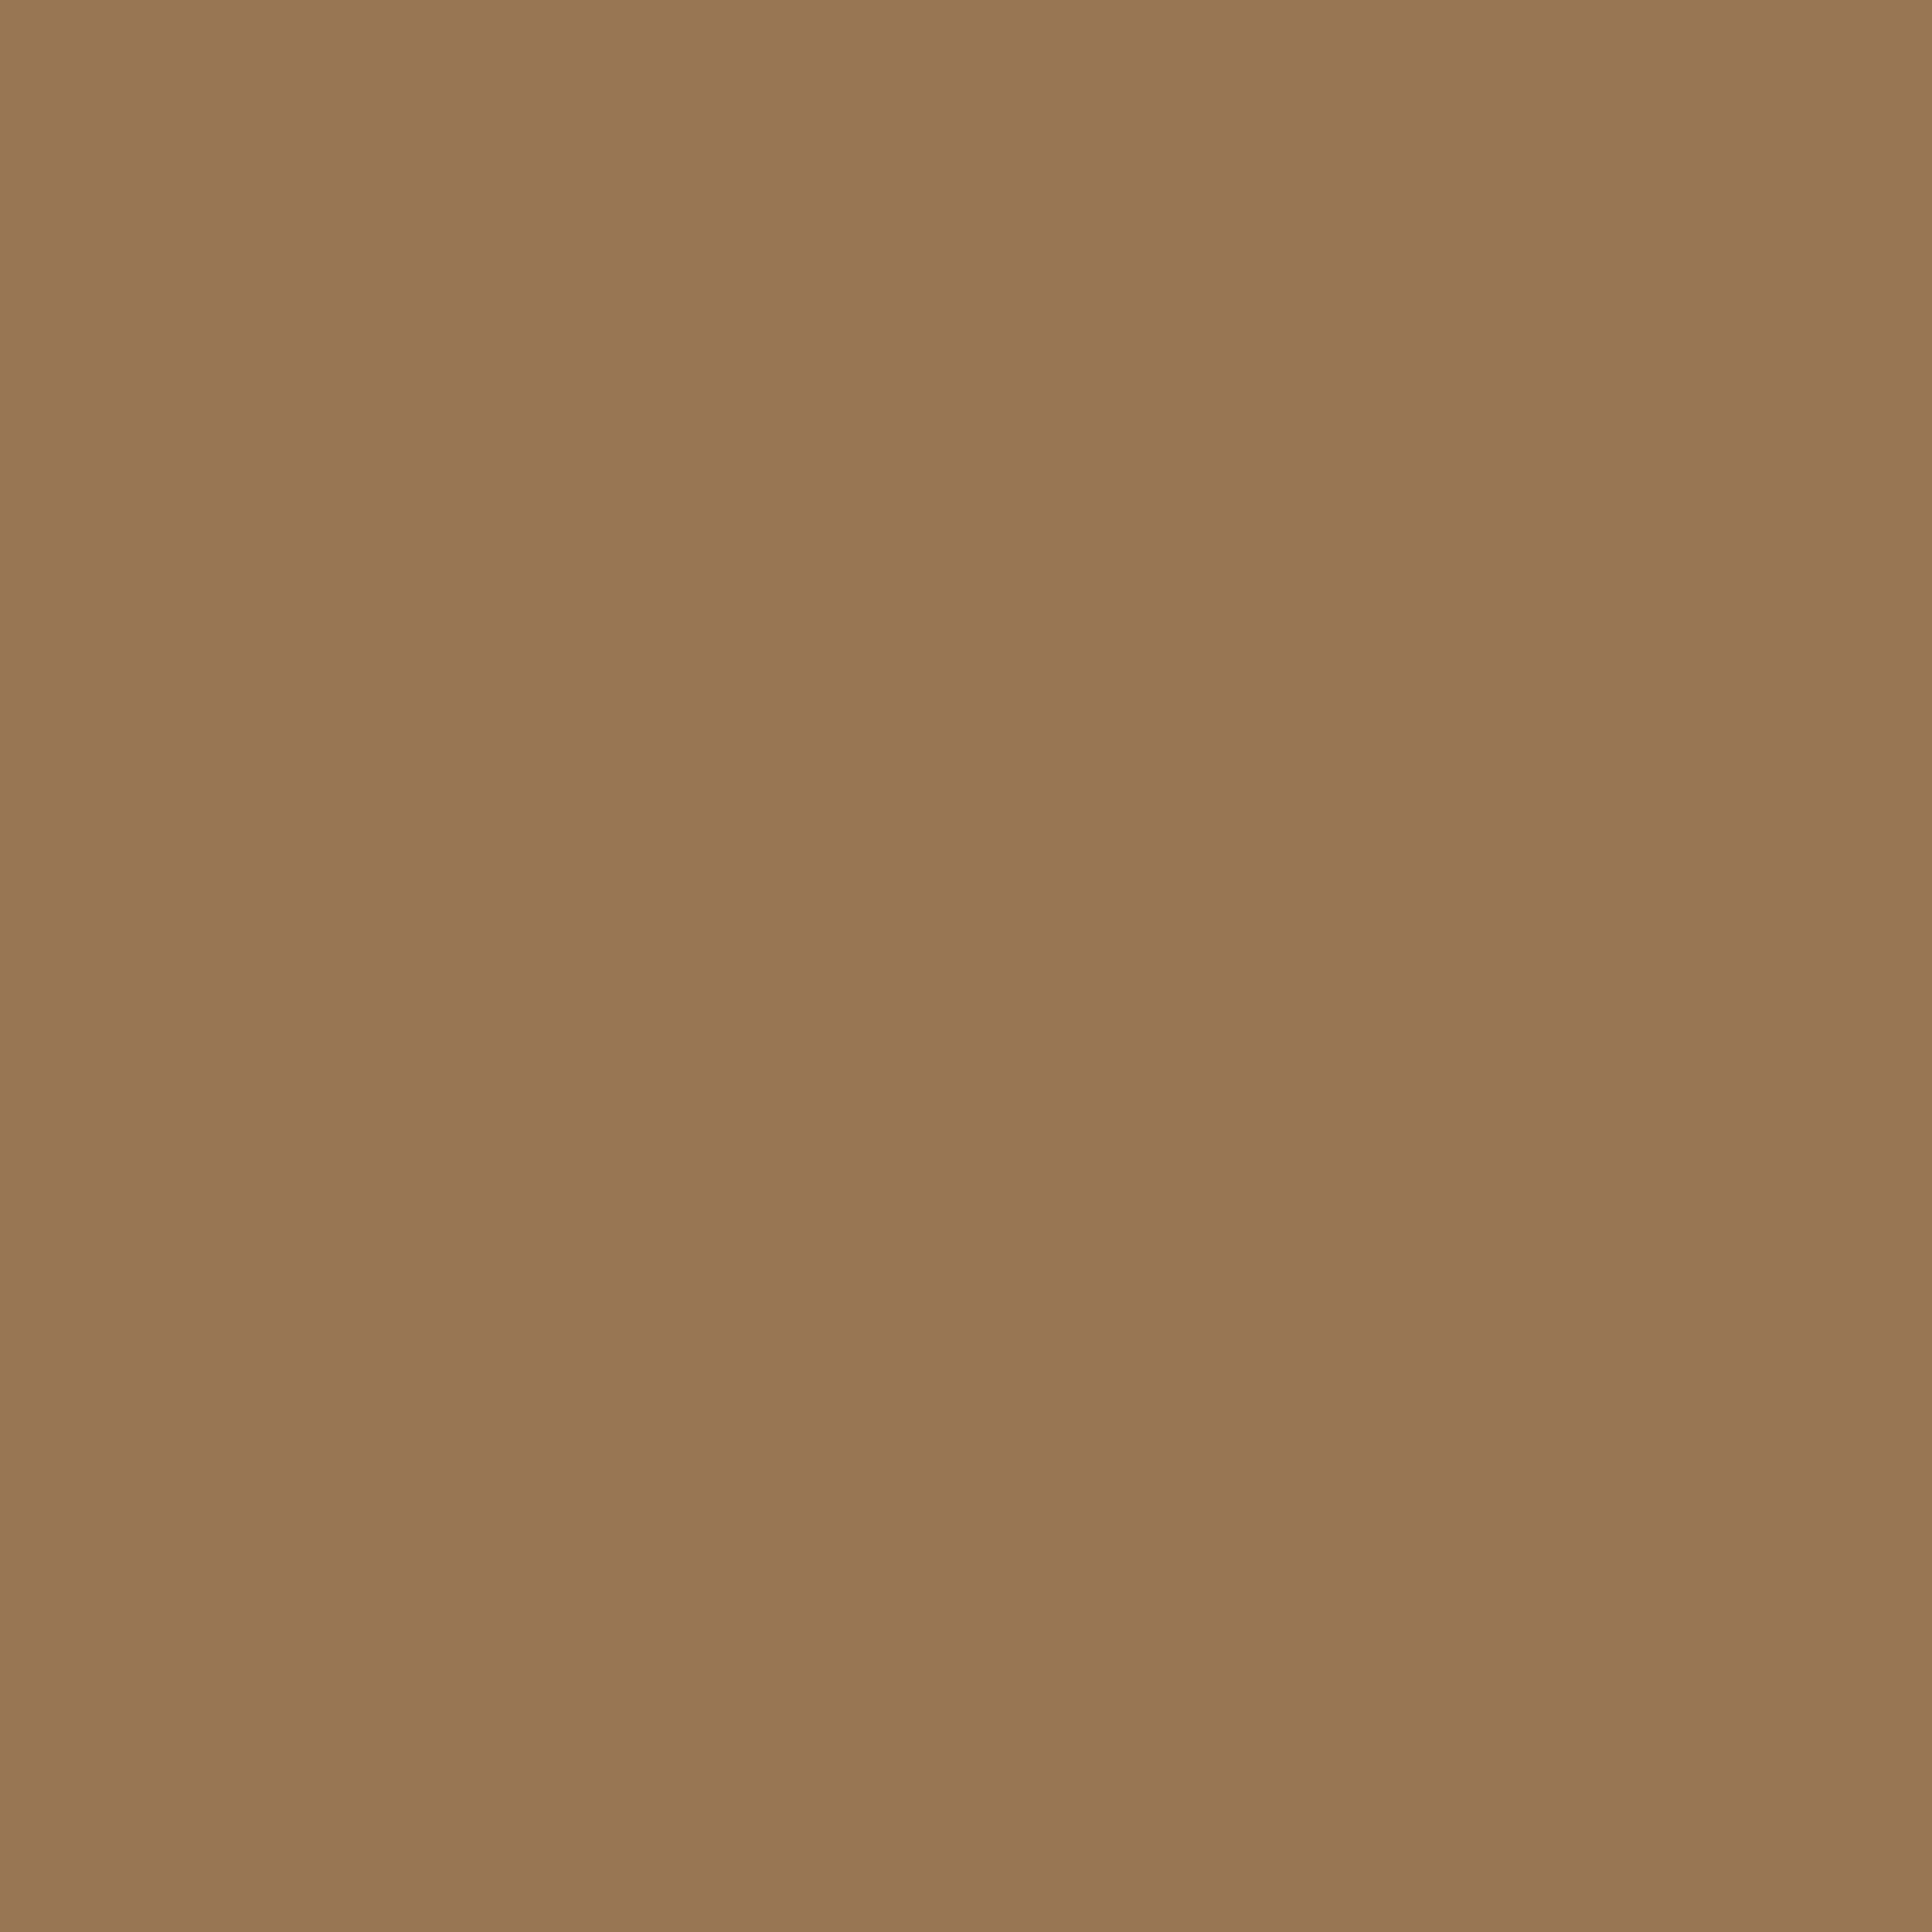 2732x2732 Pale Brown Solid Color Background